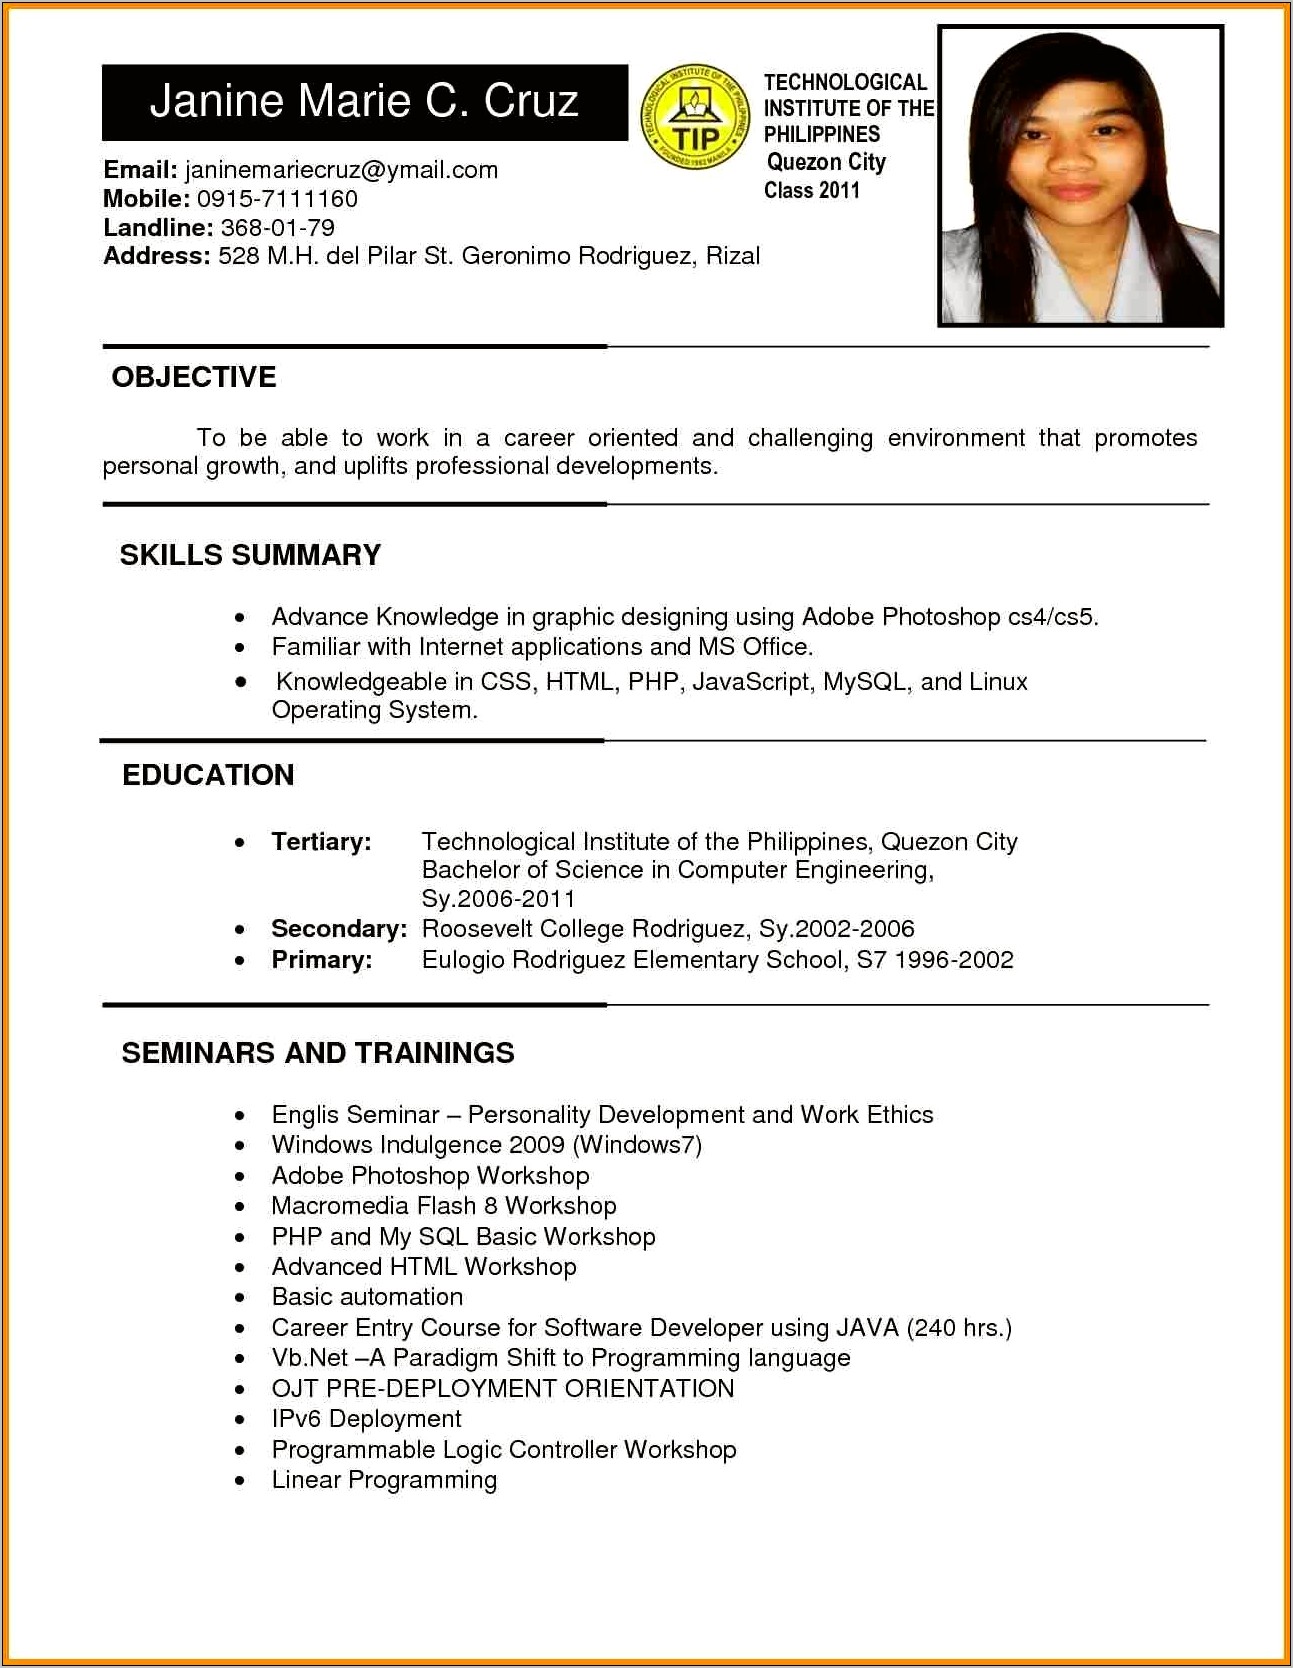 Sample Resume Philippines With Work Experience